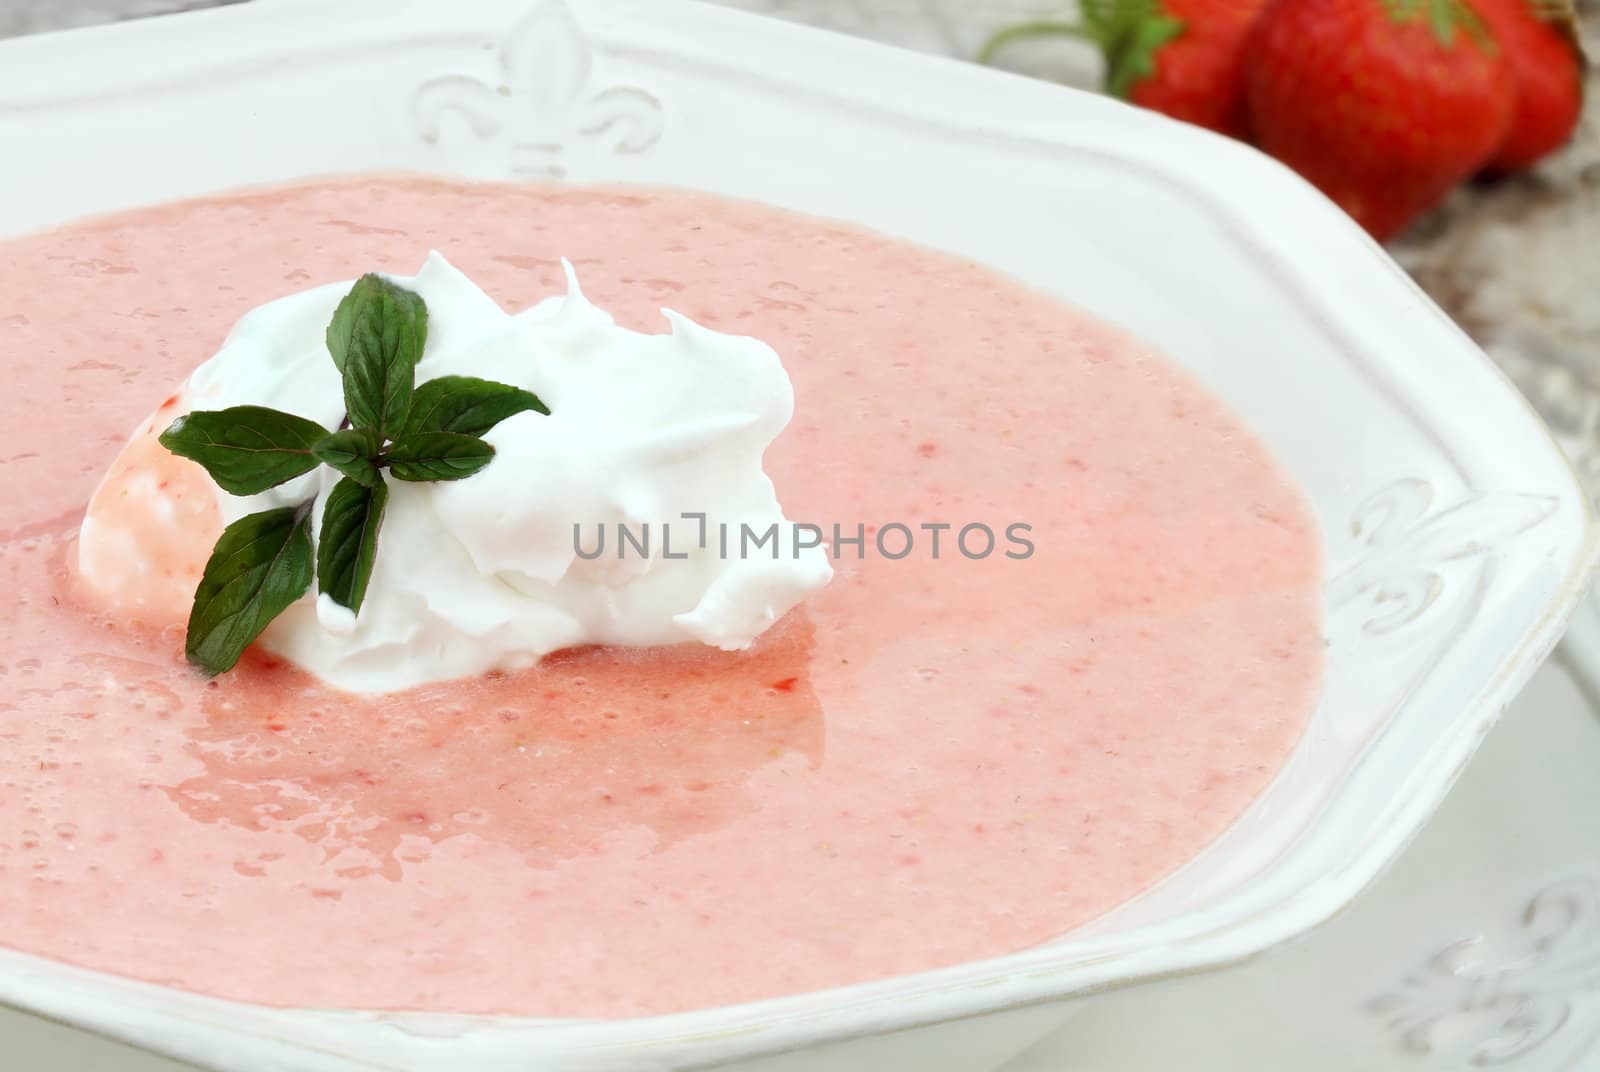 Macro of a bowl of chilled strawberry soup, garnished with a dollop of whipped cream and a fresh sprig of chocolate mint. Shallow depth of field with some blur on lower portion of image.

